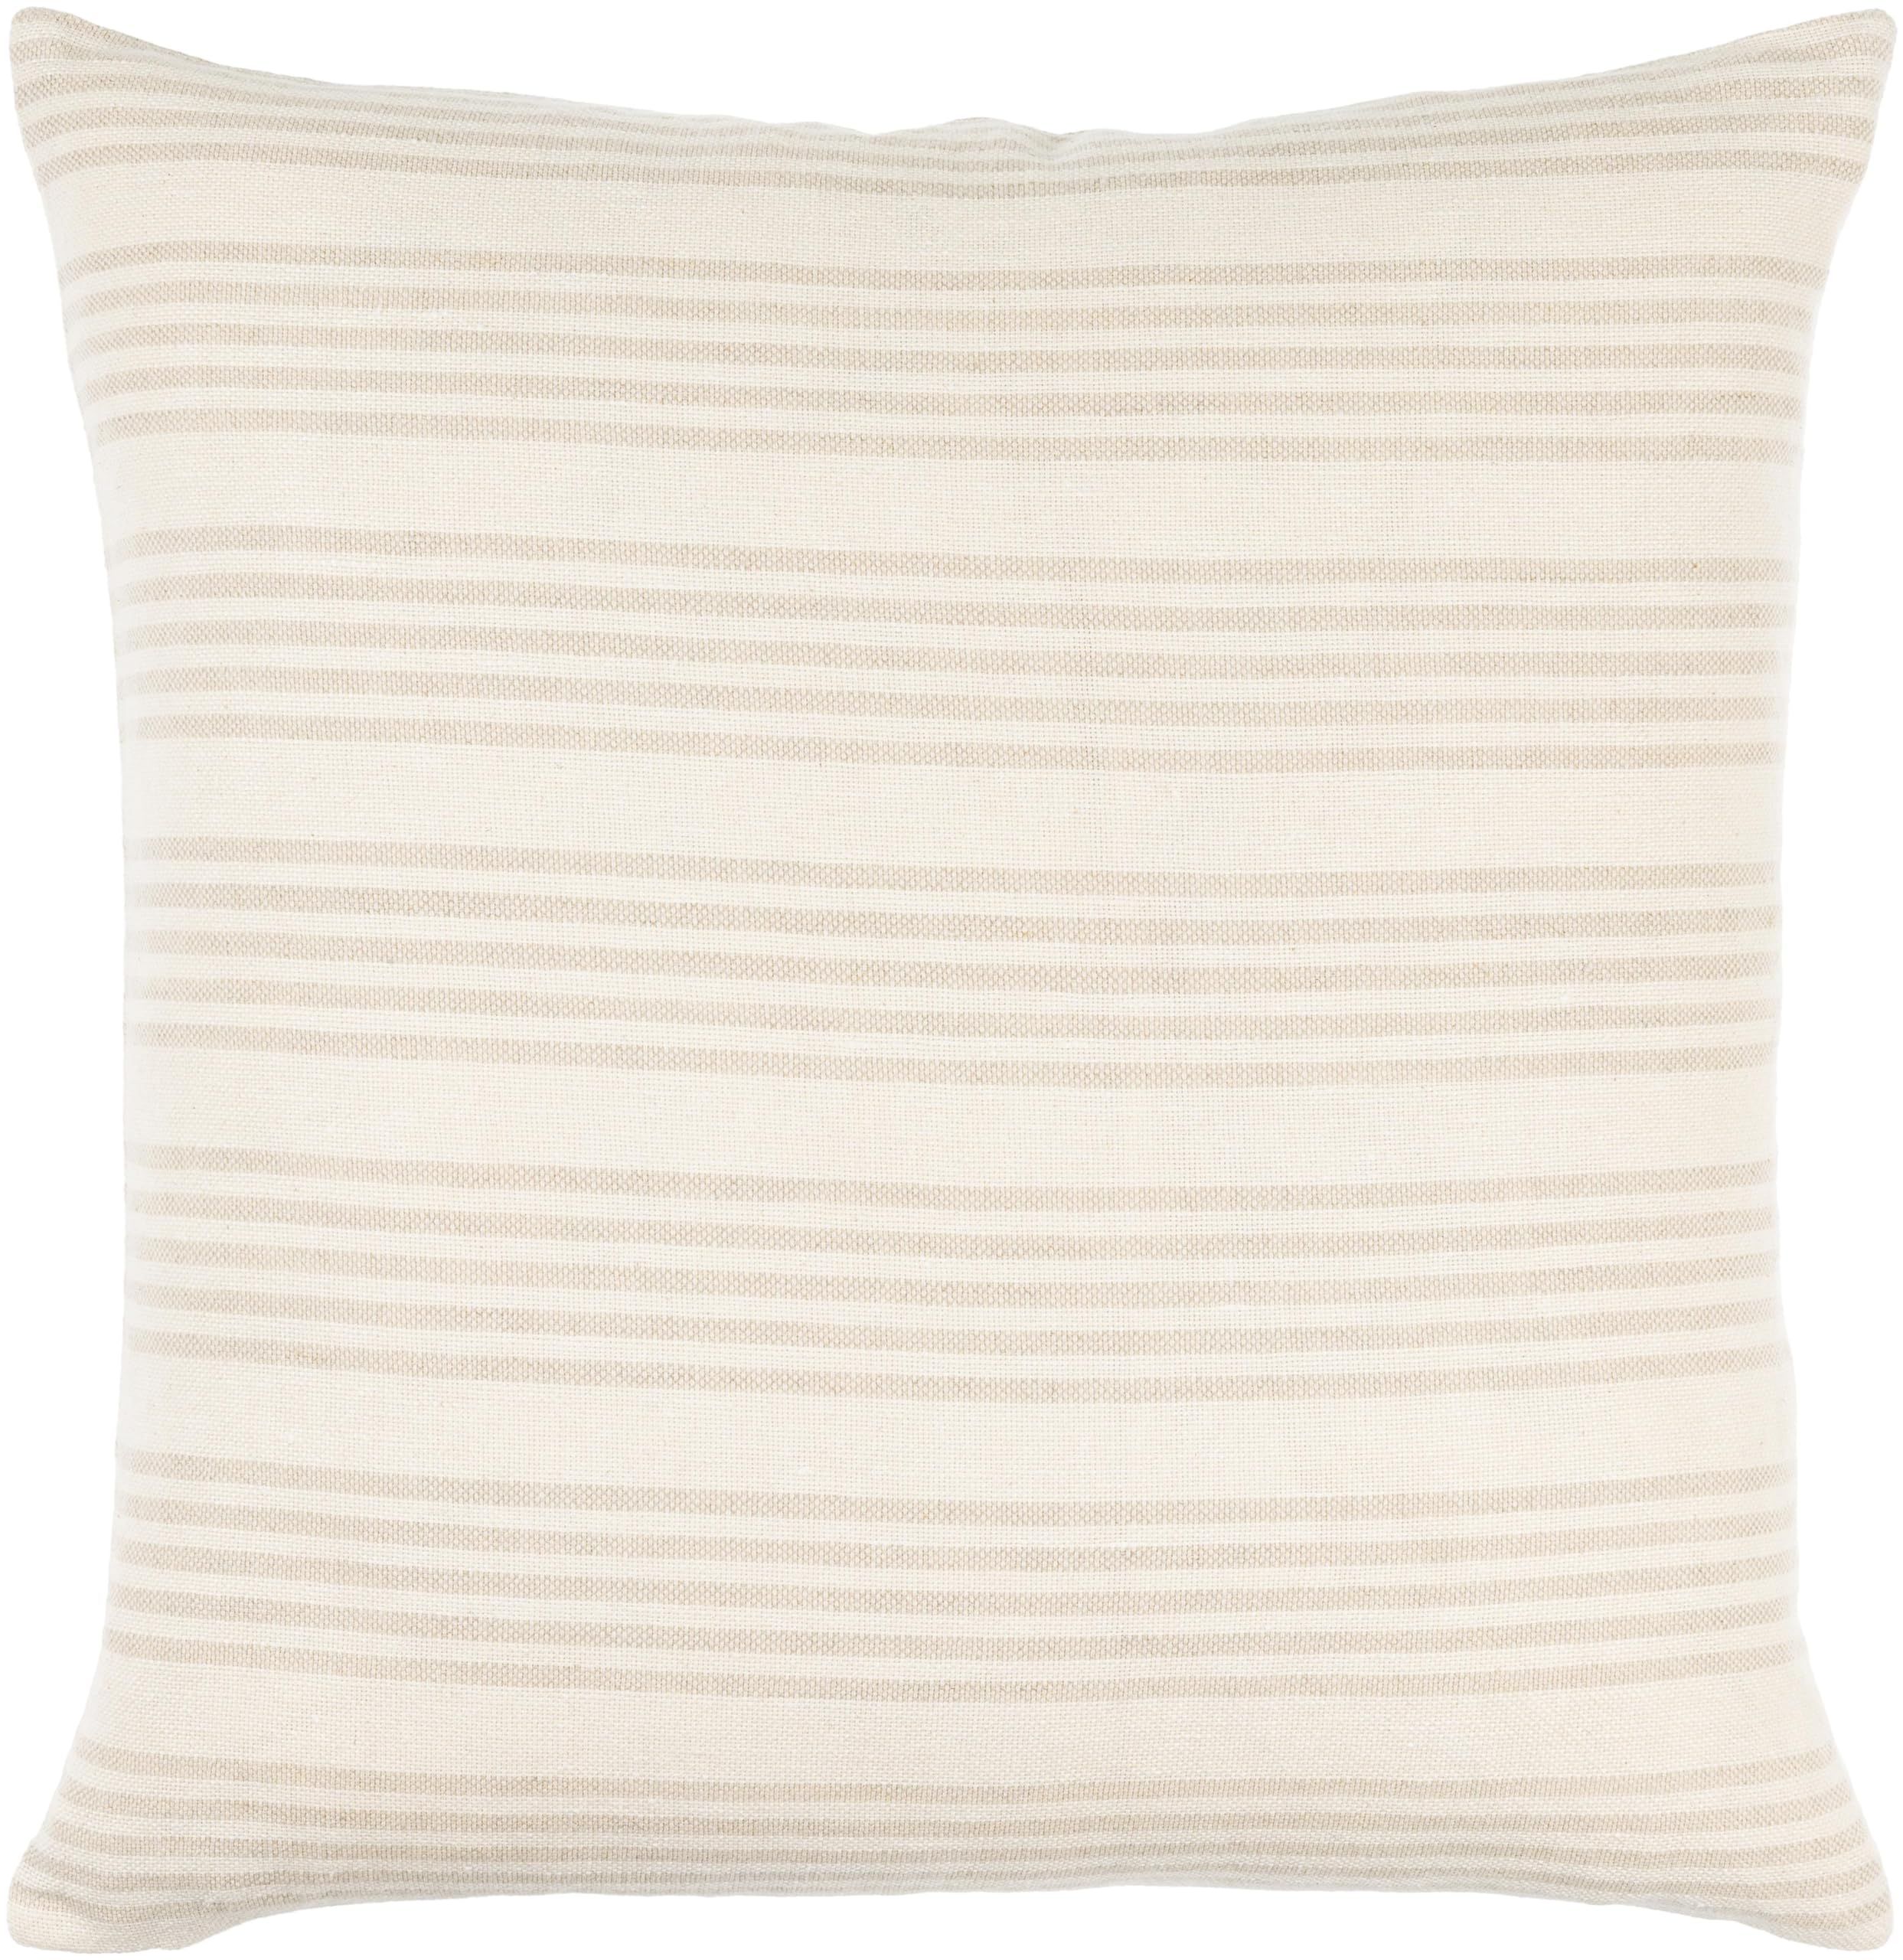 Surya x Becki Owens Modern Mindy Accent Pillow Cover only, 20" L x 20" W, Cream | Amazon (US)